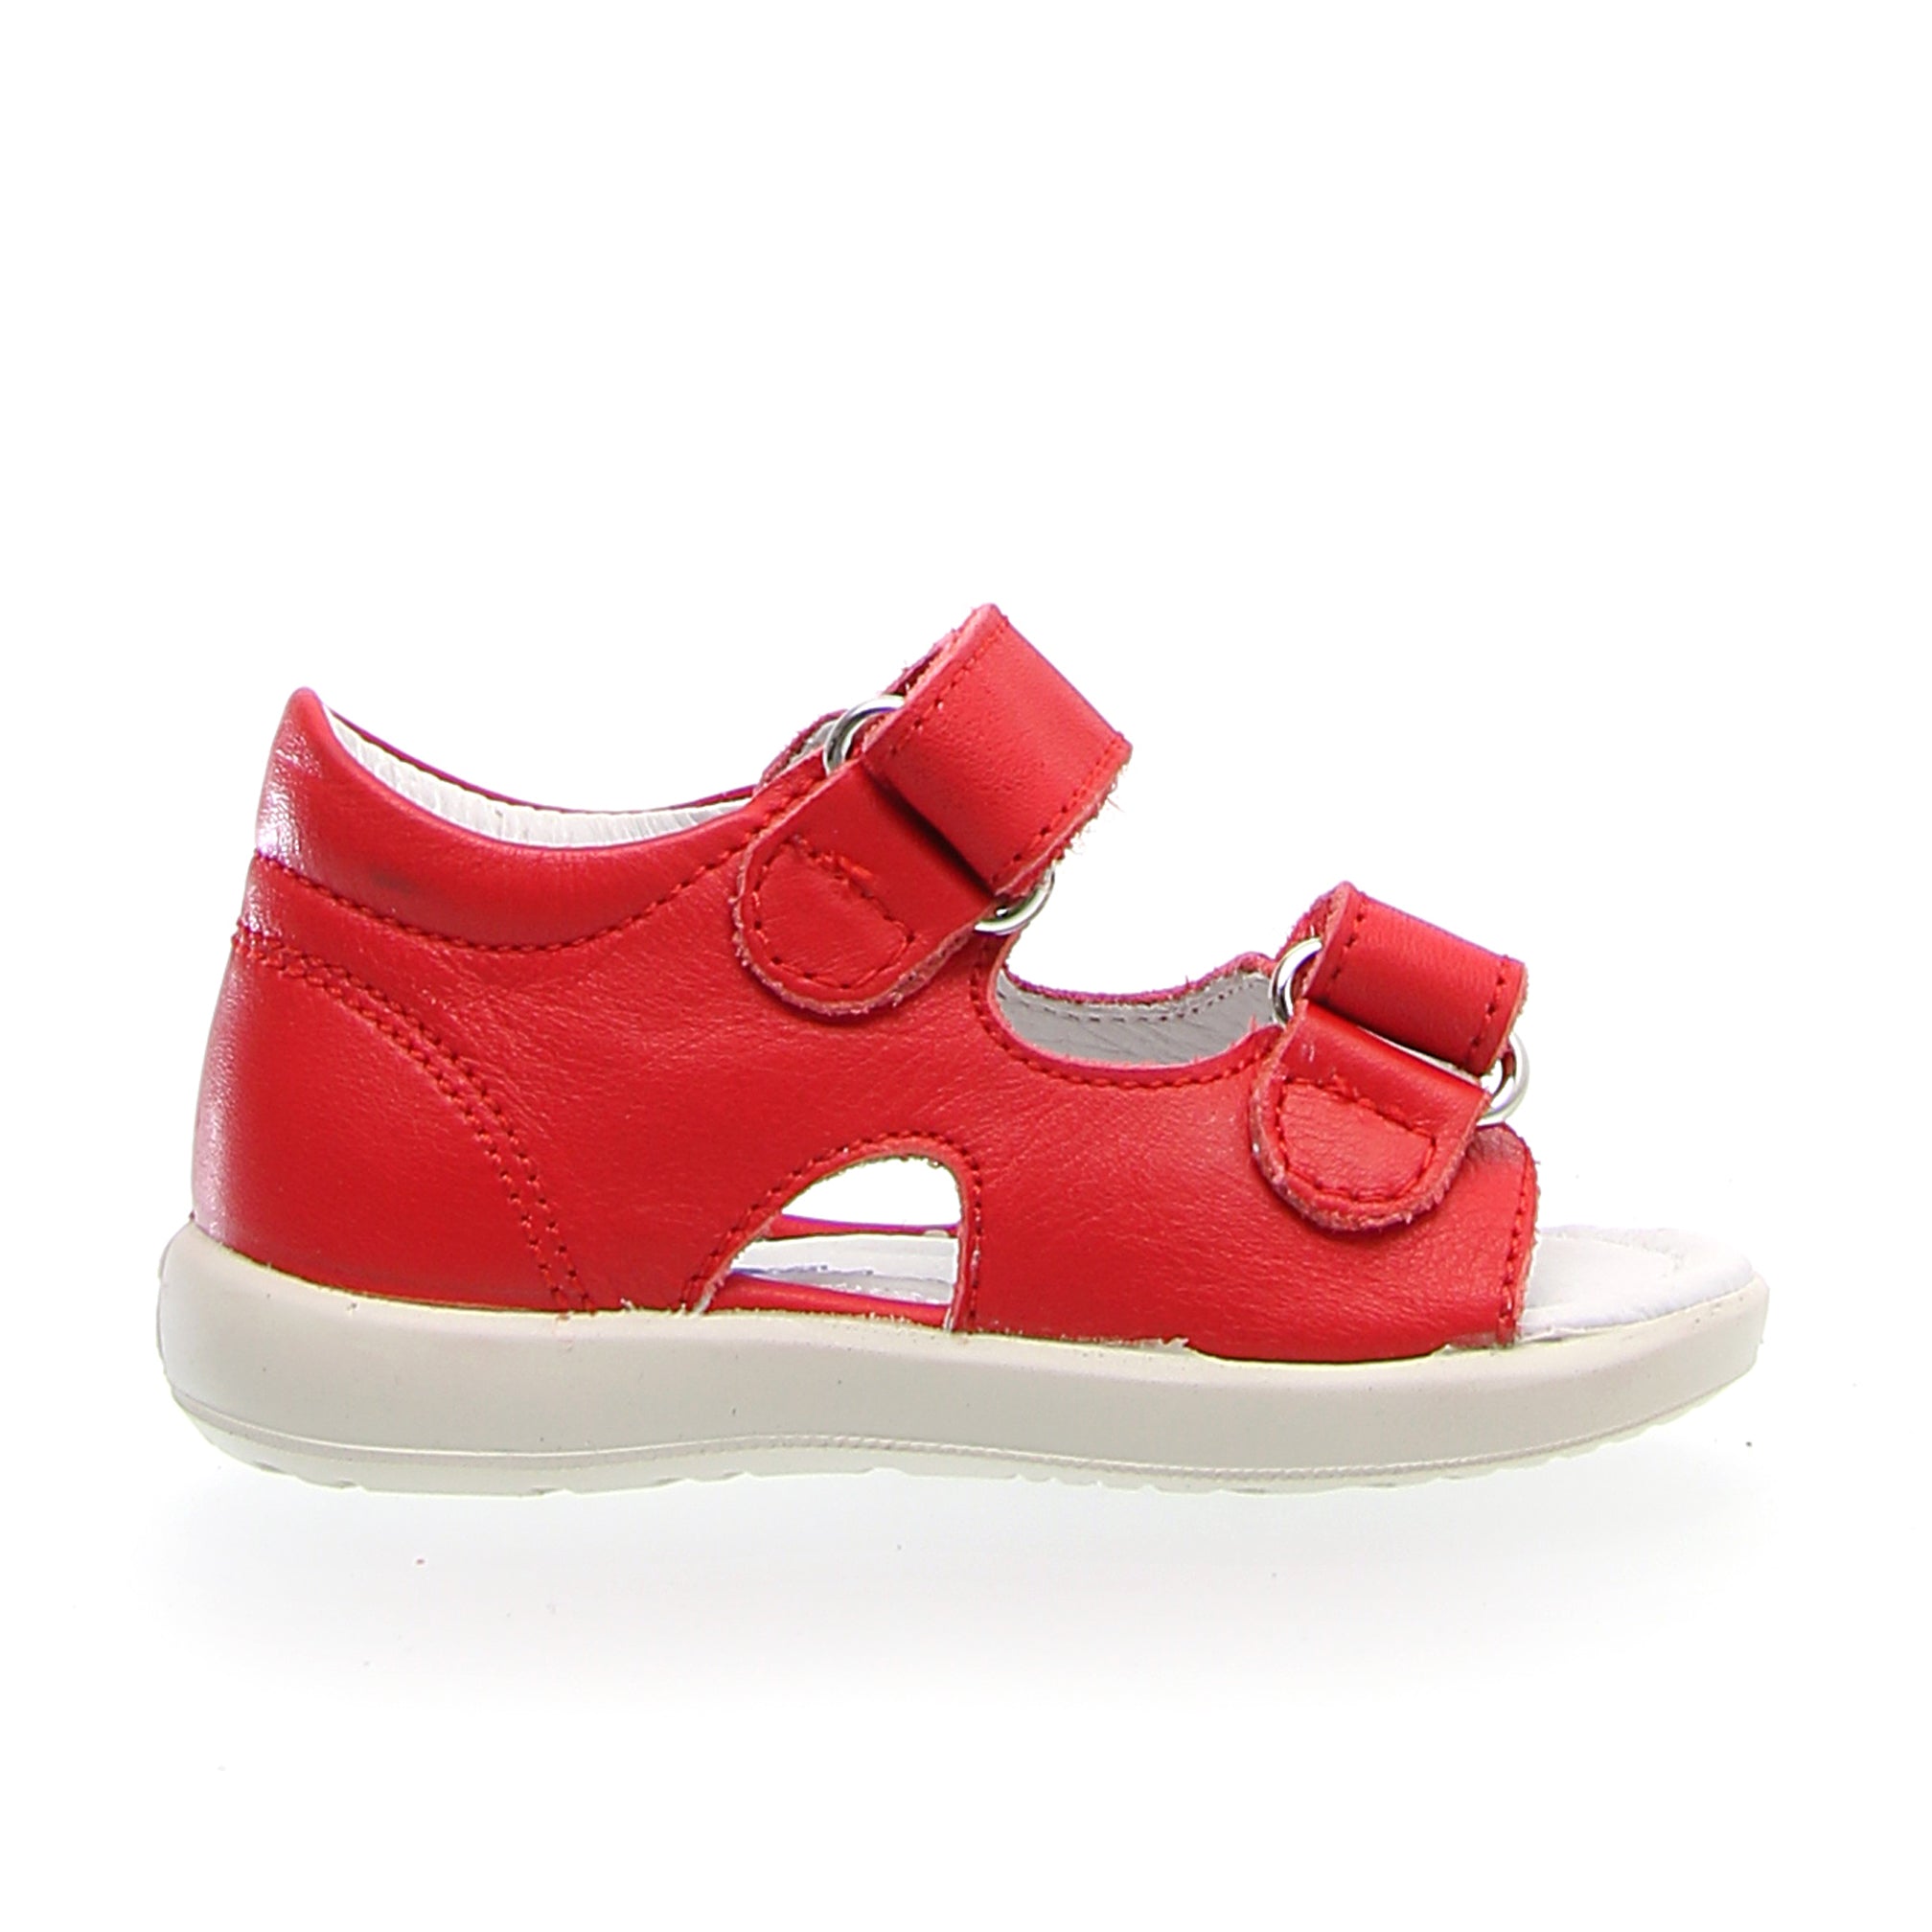 Falcotto New River Red Sandals